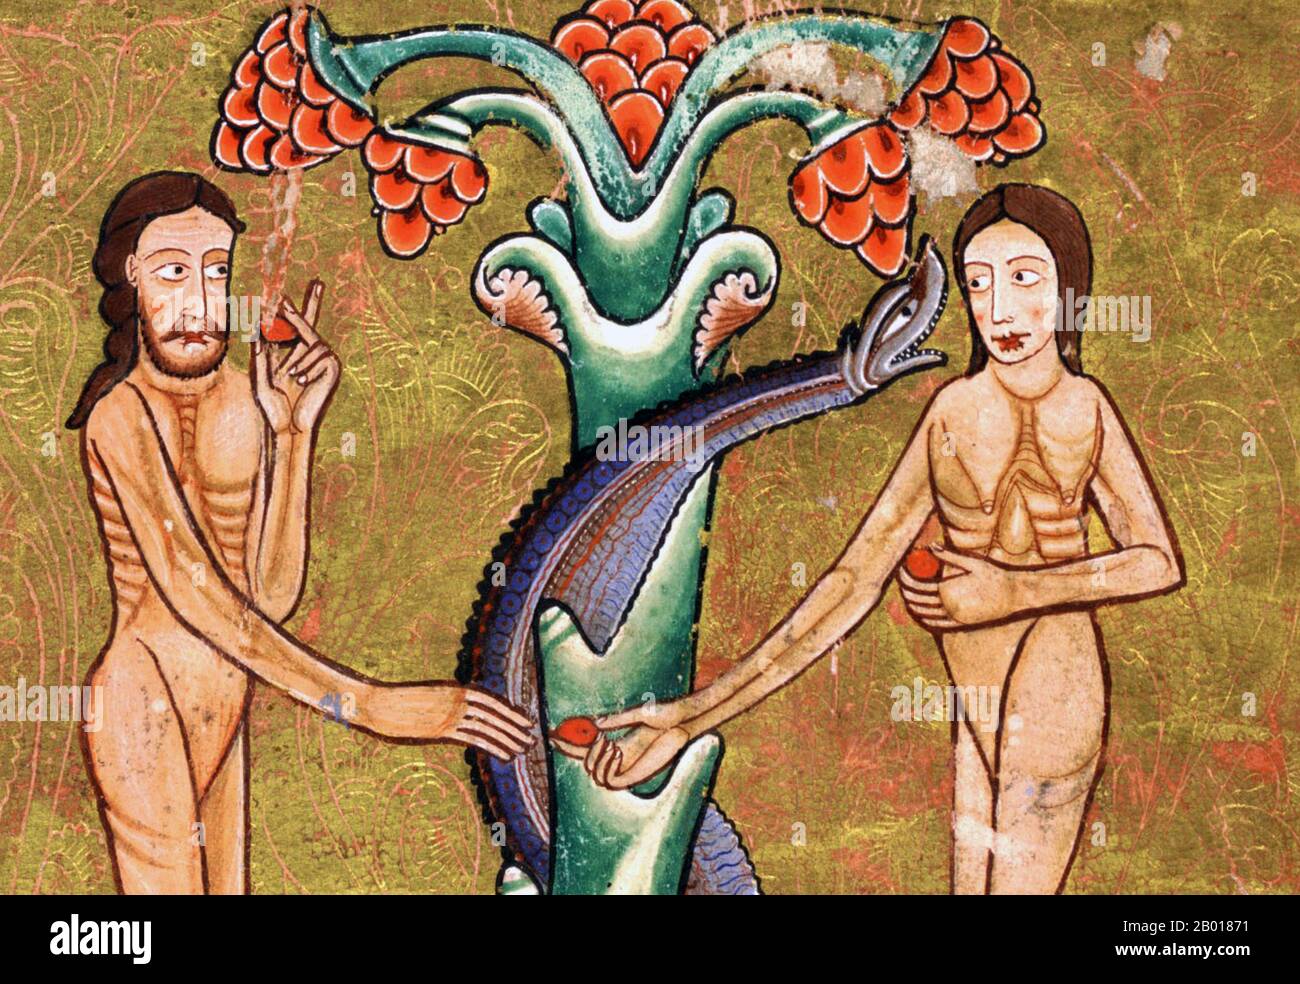 England: 'The Temptation of Adam and Eve in the Earthly Paradise'. Detail of illumination on parchment from the Hunterian Psalter, c. 1170.  The Hunterian Psalter (or York Psalter) is an illuminated manuscript of the 12th century. It was produced in England some time around 1170, and is considered a striking example of Romanesque book art. The work is part of the collection of the Glasgow University Library, which acquired the book in 1807. It derives its colloquial name, the 'Hunterian Psalter', from having been part of the collection of 18th century Scottish anatomist William Hunter. Stock Photo